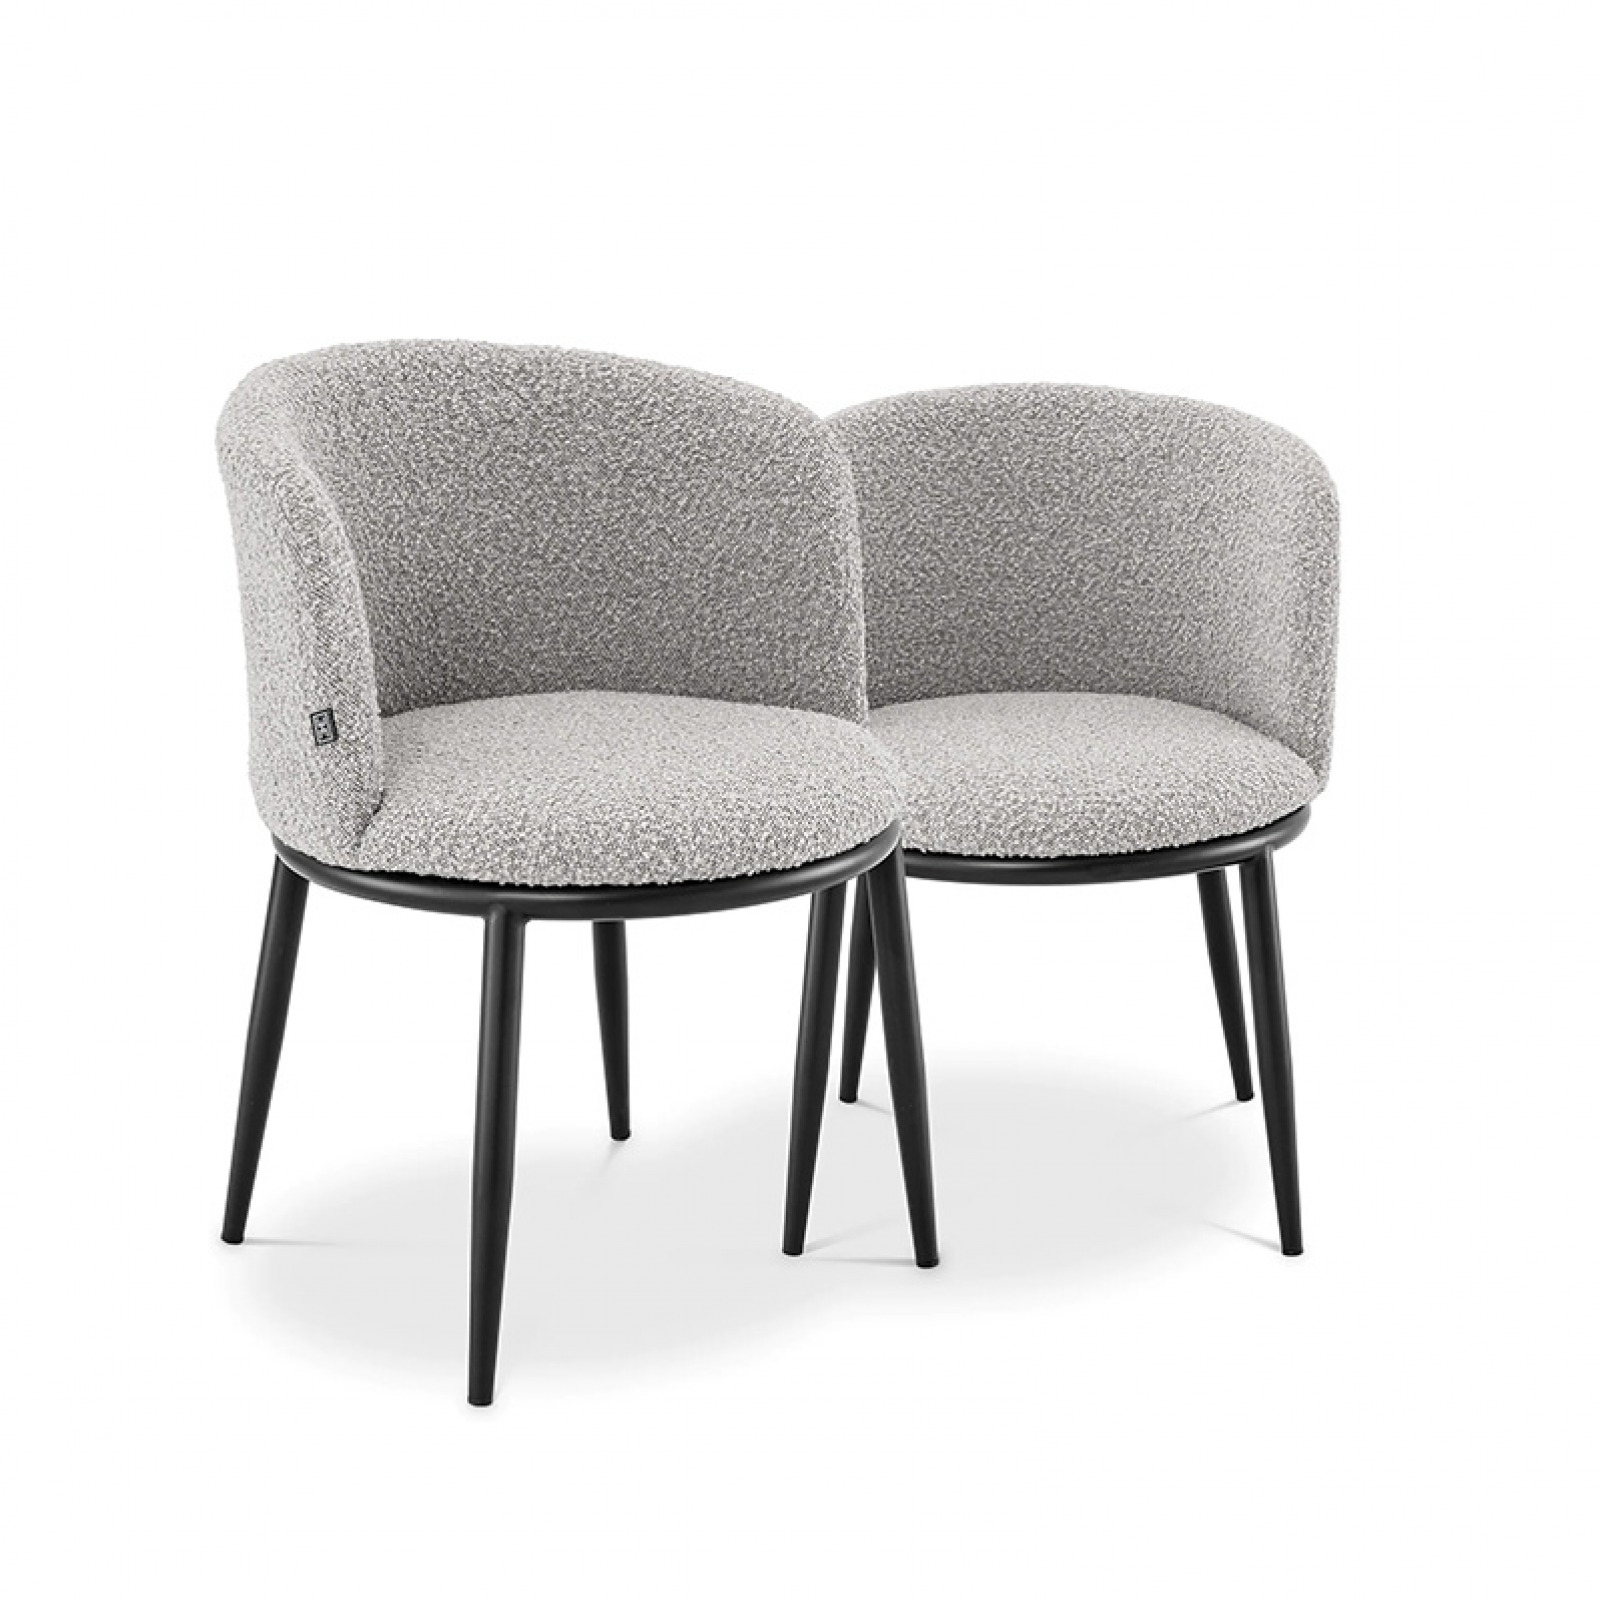 Filmore grey bouckle chair set of 2